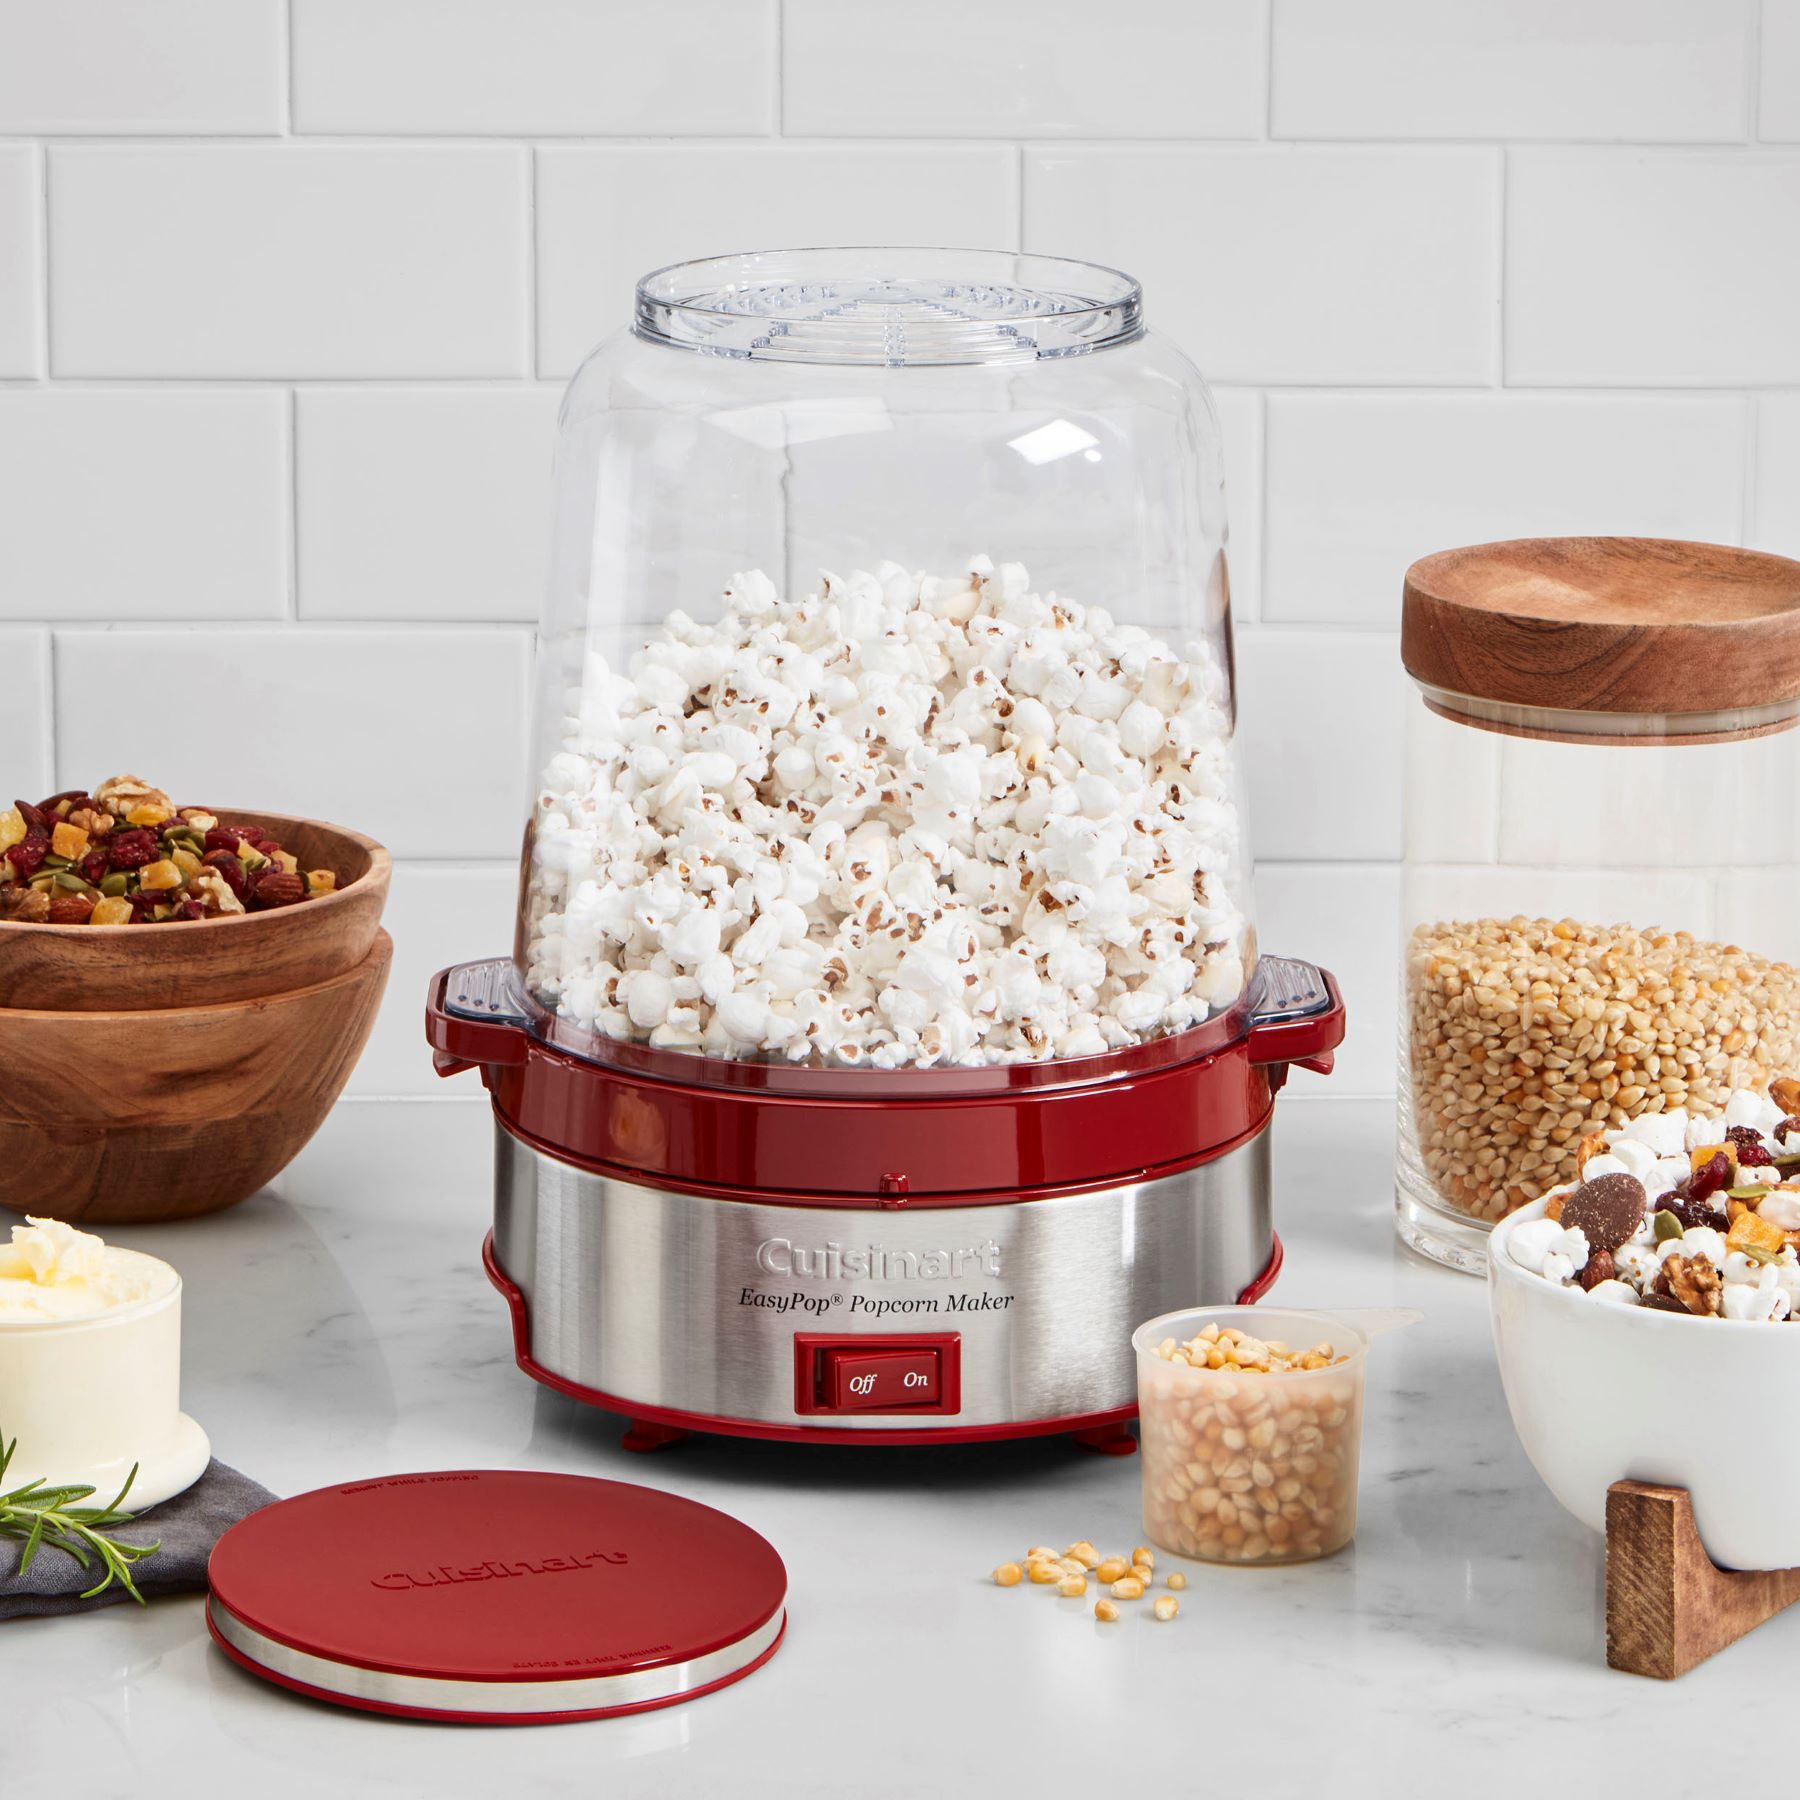 Popcorn Maker Review: The Perfect Addition to Your Movie Nights